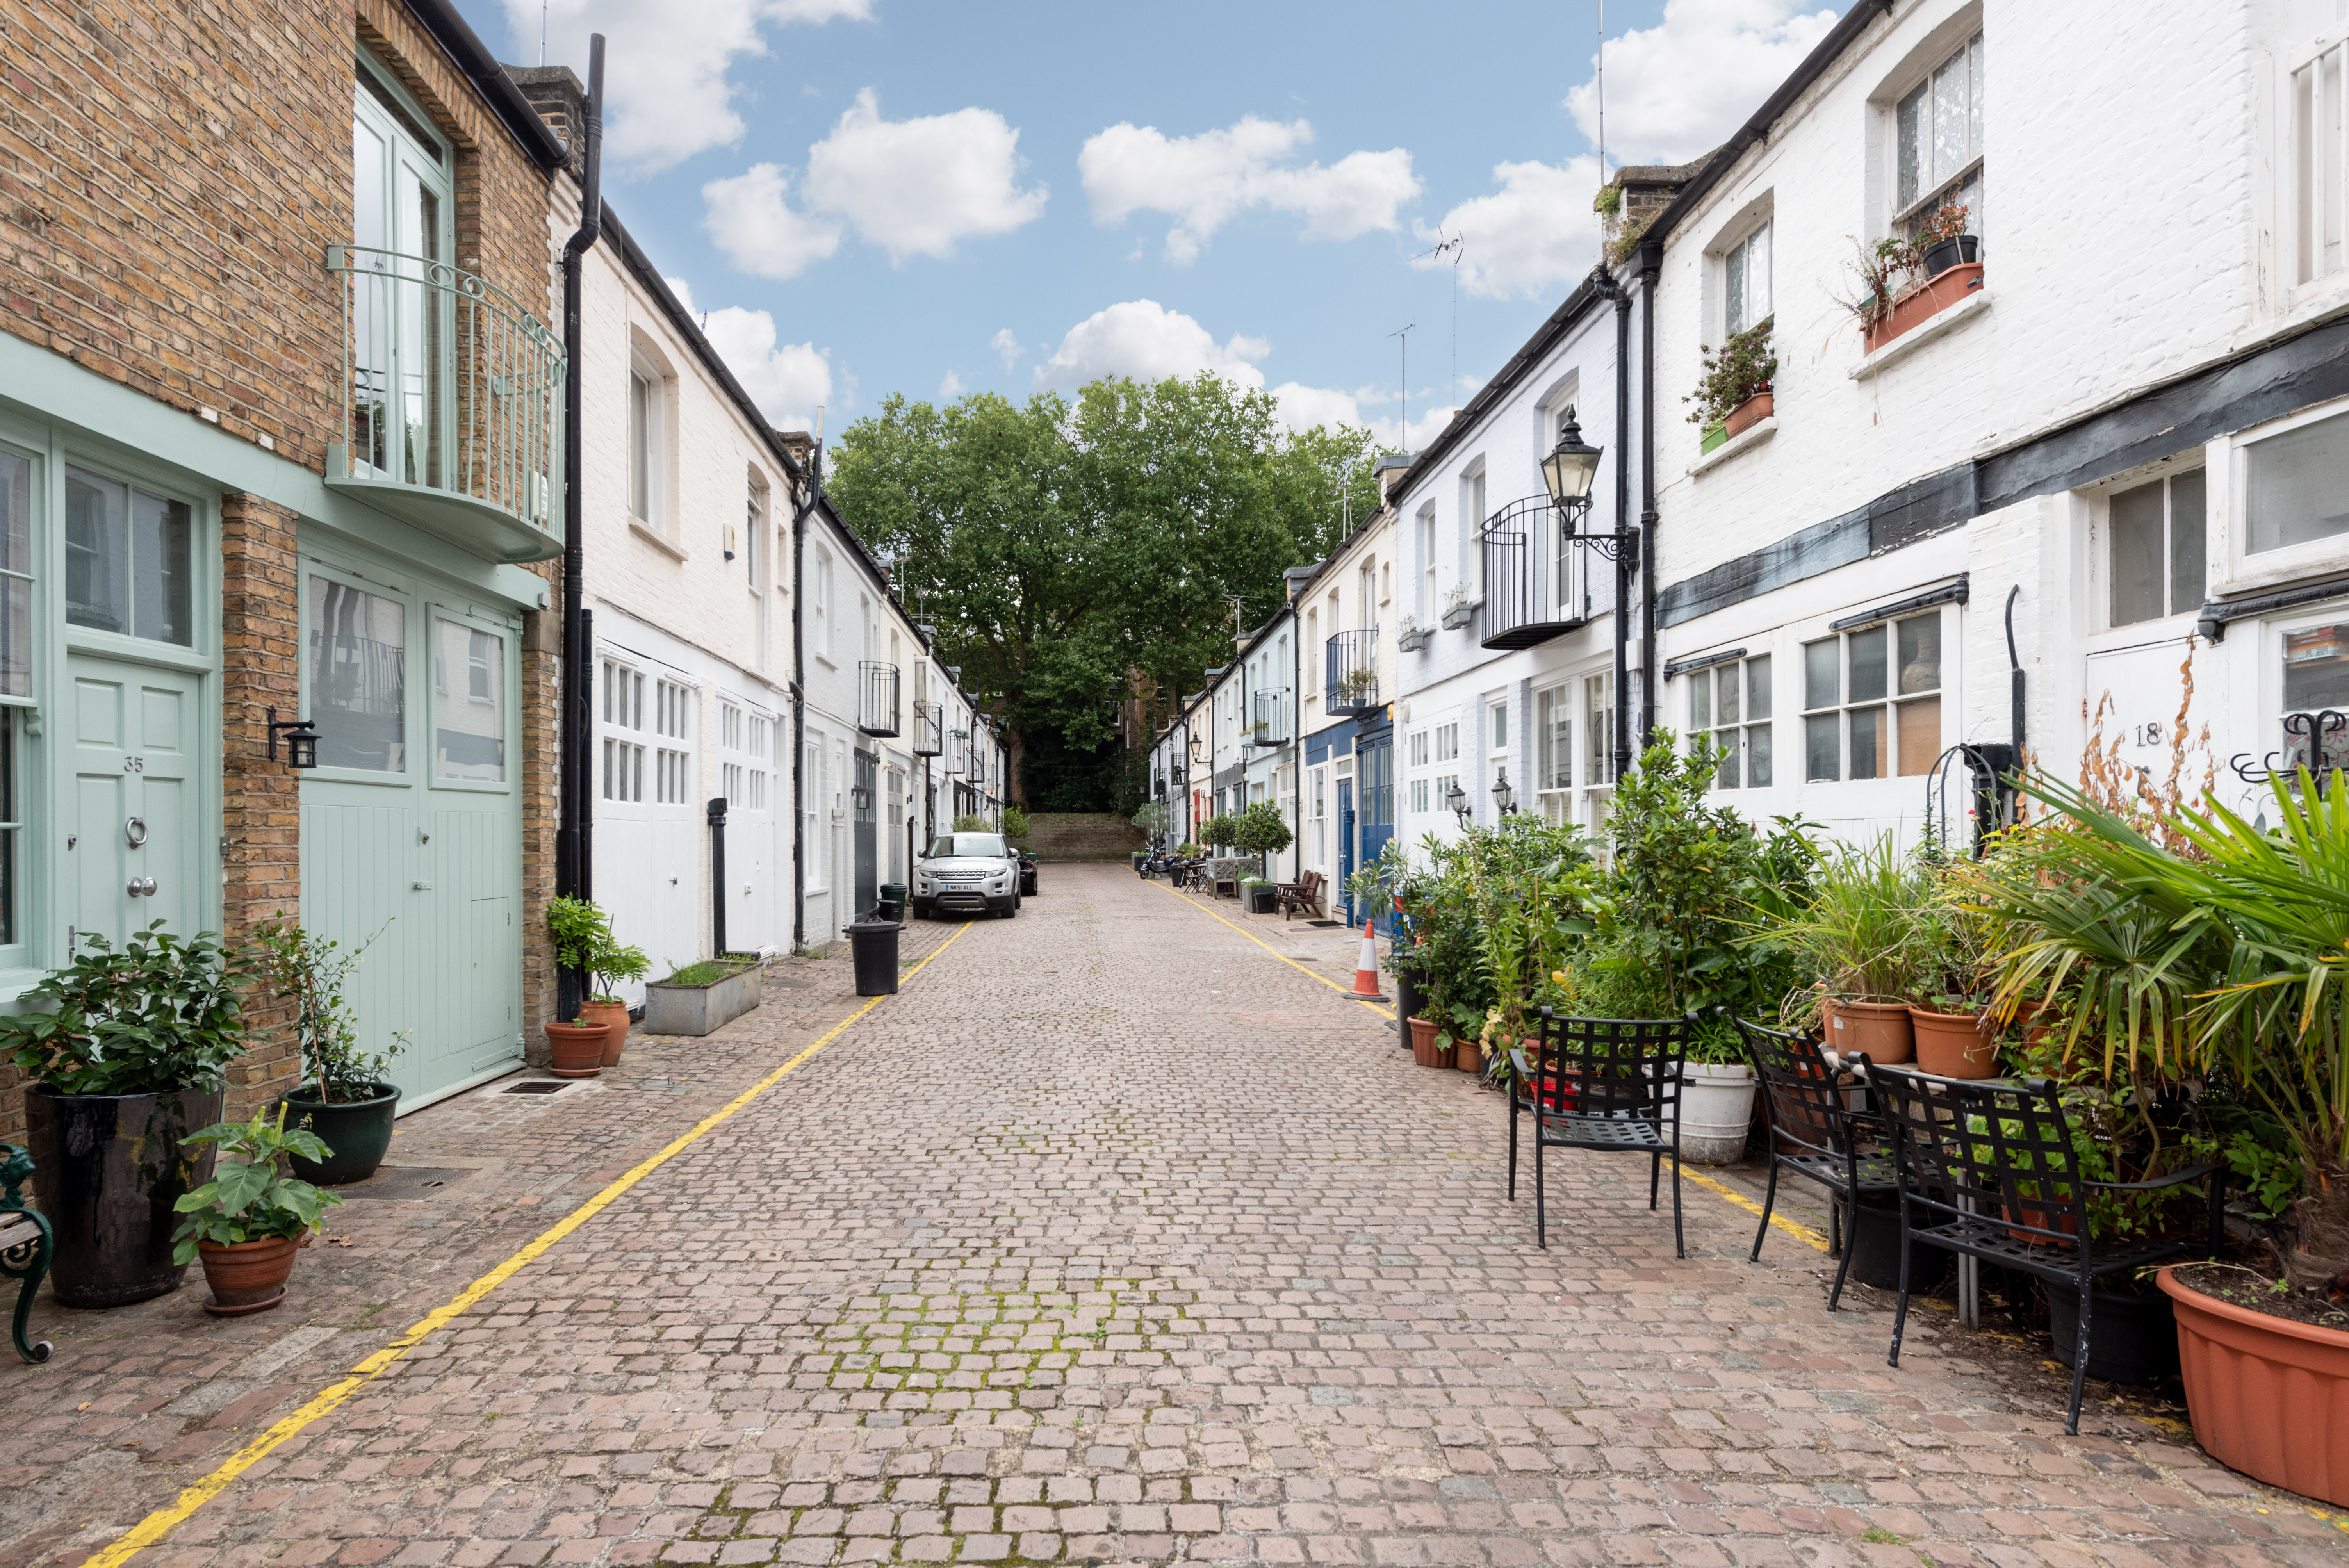 Looking to rent in London? These mews streets are some of the best places in London to live